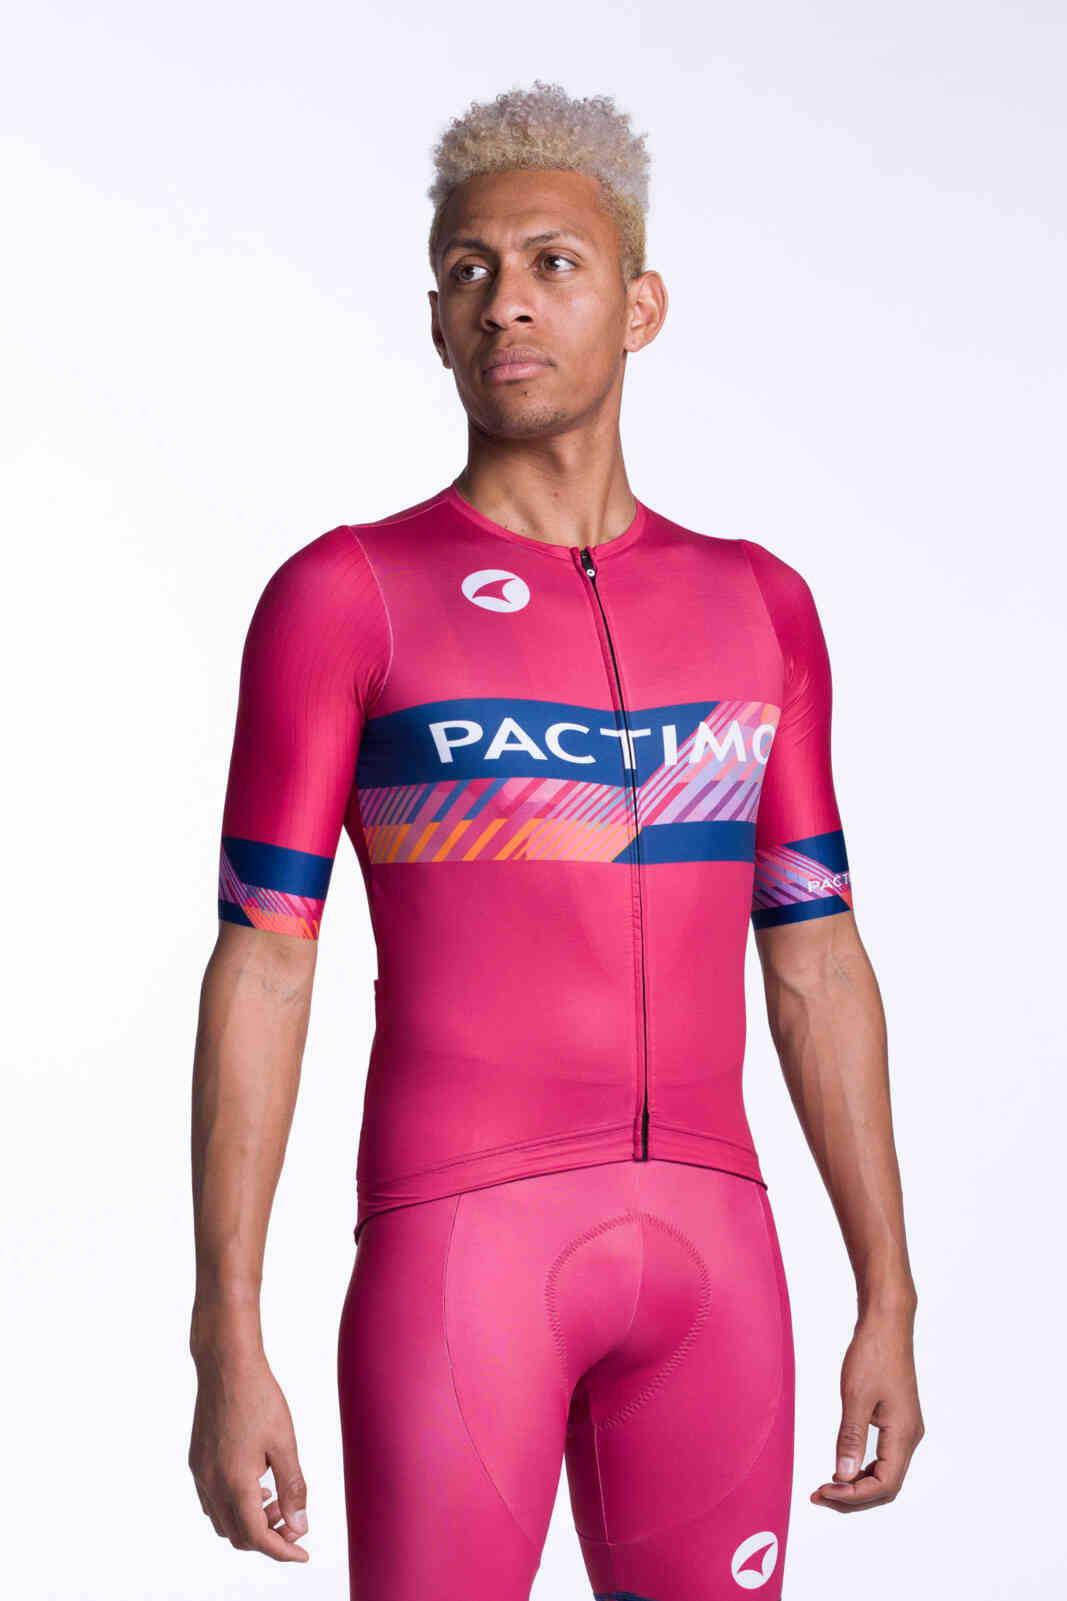 Men's Aero Fit Custom Cycling Jersey - Flyte Front View